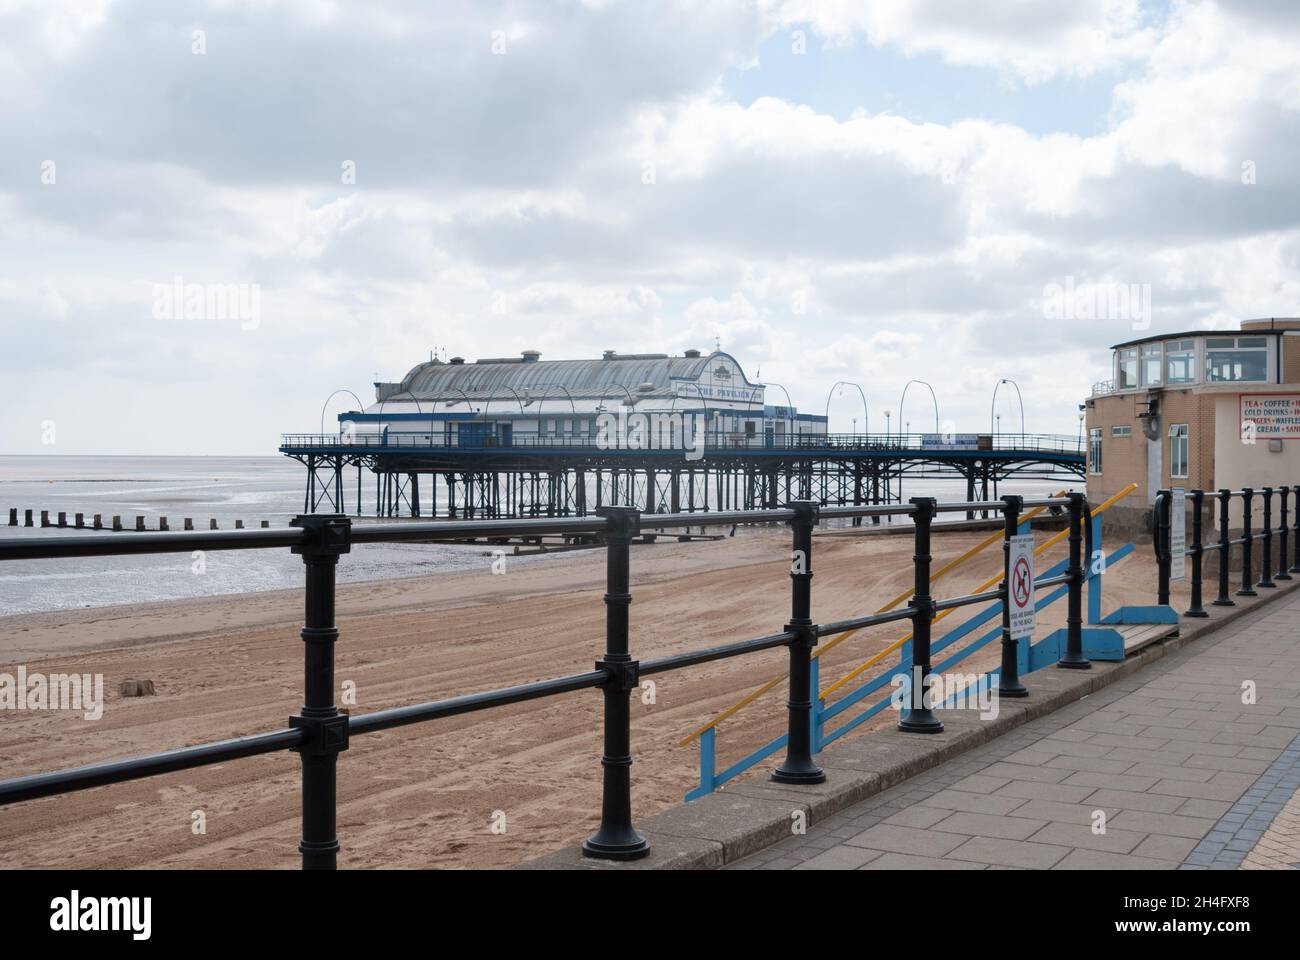 Central Promenade, Tide Out, English Coastal Resort, Summertime, Seaside Town, Cleethorpes, Sand, Seaside Pier Banque D'Images